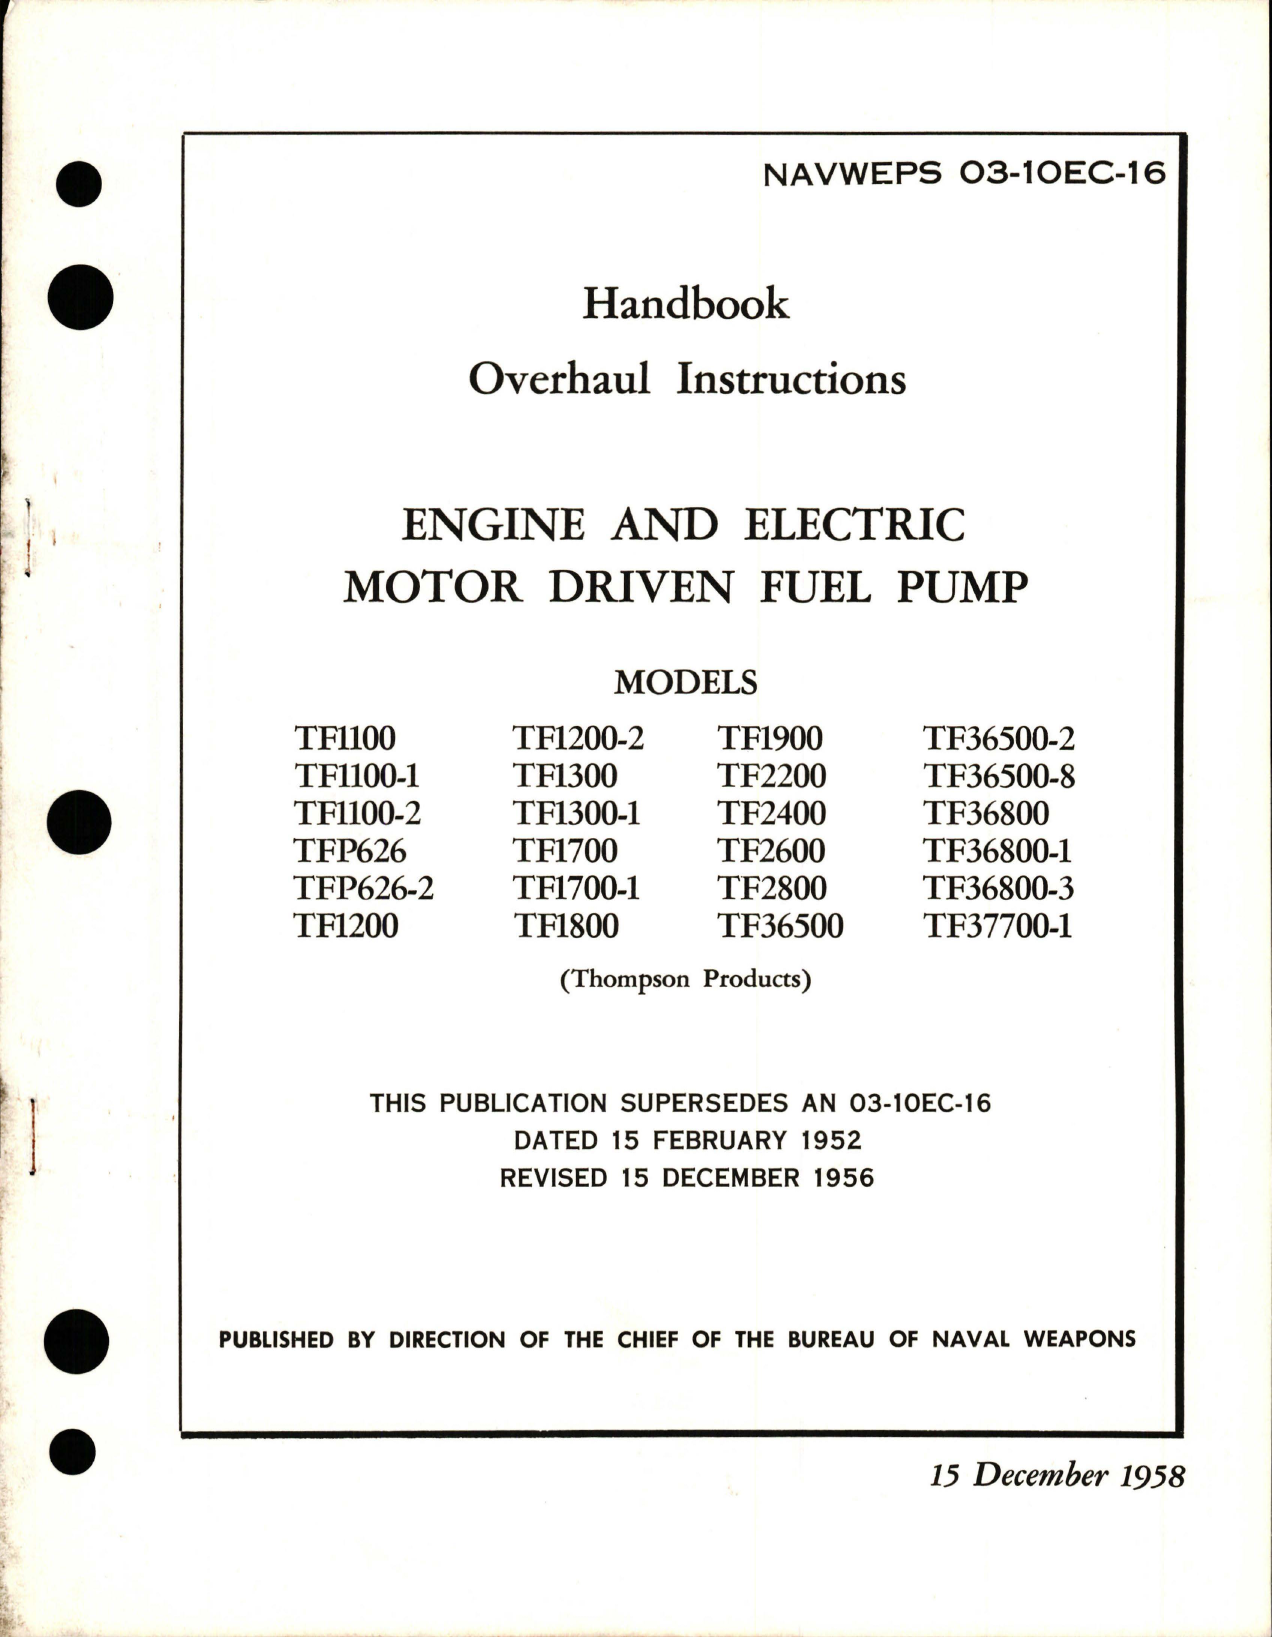 Sample page 1 from AirCorps Library document: Overhaul Instructions for Engine and Electric Motor Driven Fuel Pump